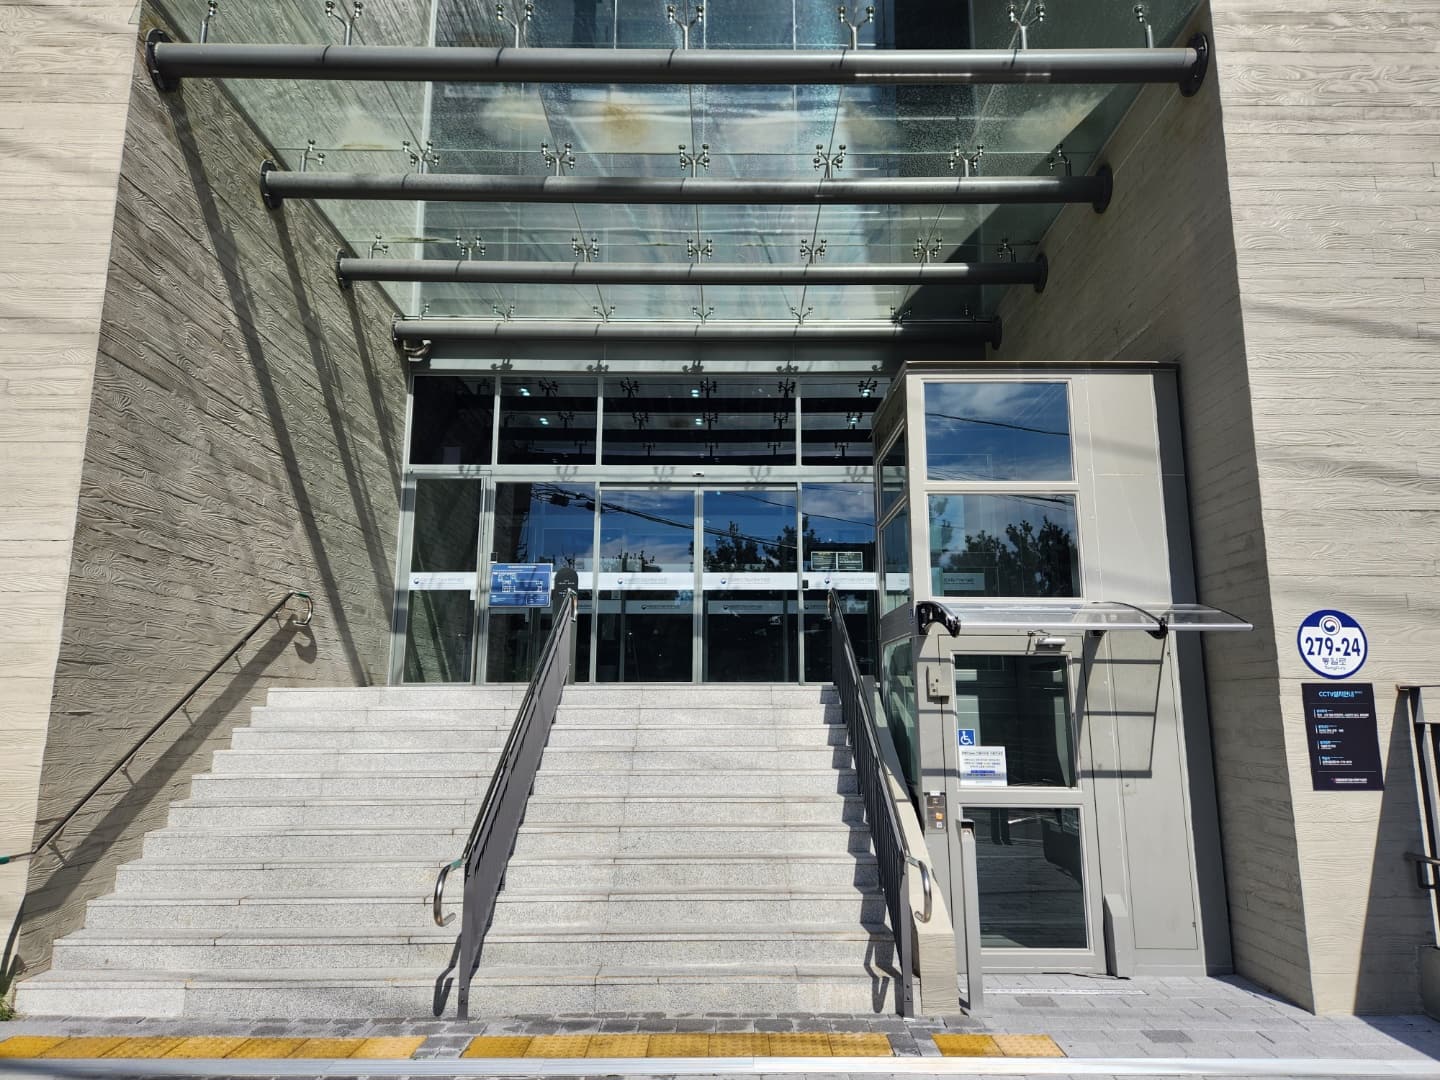 Entryway/ Main entrance0 : The main entrance of the museum with steps and a vertical platform lift